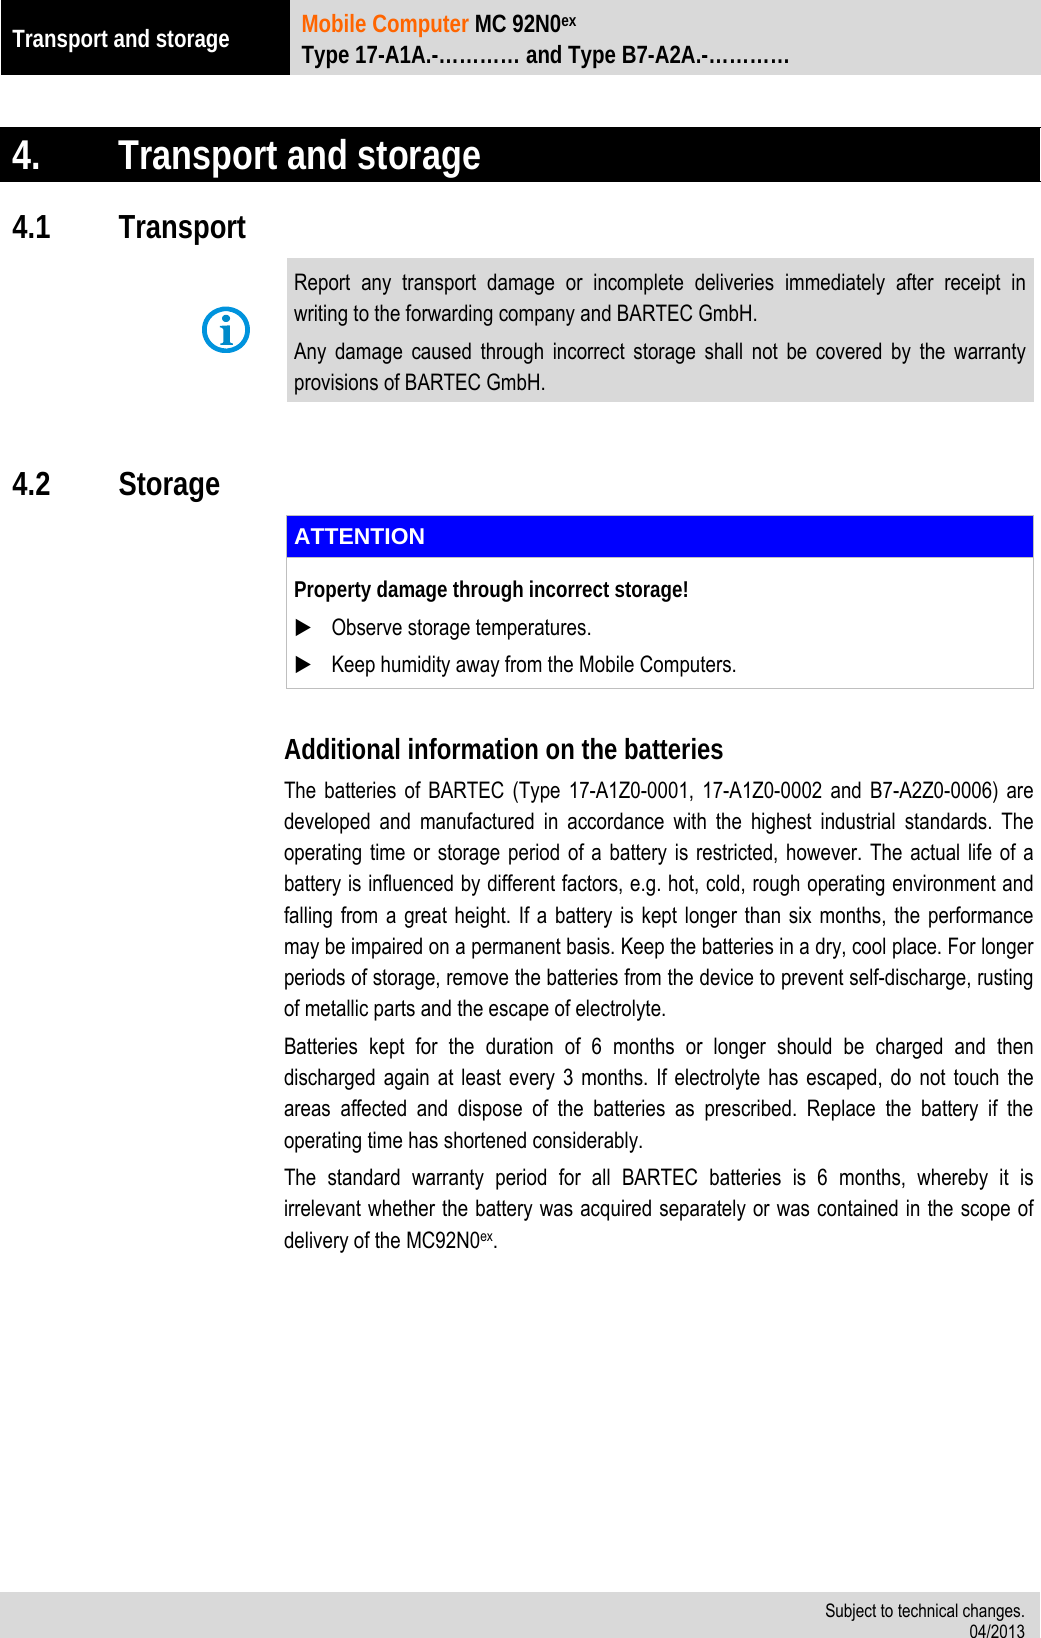 Transport and storage Mobile Computer MC 92N0ex Type 17-A1A.-………… and Type B7-A2A.-…………   Subject to technical changes. 04/2013   4. Transport and storage 4.1 Transport  Report any transport damage or incomplete deliveries immediately after receipt in writing to the forwarding company and BARTEC GmbH. Any damage caused through incorrect storage shall not be covered by the warranty provisions of BARTEC GmbH.  4.2 Storage  ATTENTION Property damage through incorrect storage!  Observe storage temperatures.  Keep humidity away from the Mobile Computers.  Additional information on the batteries The batteries of BARTEC (Type 17-A1Z0-0001, 17-A1Z0-0002 and B7-A2Z0-0006) are developed and manufactured in accordance with the highest industrial standards. The operating time or storage period of a battery is restricted, however. The actual life of a battery is influenced by different factors, e.g. hot, cold, rough operating environment and falling from a great height. If a battery is kept longer than six months, the performance may be impaired on a permanent basis. Keep the batteries in a dry, cool place. For longer periods of storage, remove the batteries from the device to prevent self-discharge, rusting of metallic parts and the escape of electrolyte. Batteries kept for the duration of 6 months or longer should be charged and then discharged again at least every 3 months. If electrolyte has escaped, do not touch the areas affected and dispose of the batteries as prescribed. Replace the battery if the operating time has shortened considerably.  The standard warranty period for all BARTEC batteries is 6 months, whereby it is irrelevant whether the battery was acquired separately or was contained in the scope of delivery of the MC92N0ex.  